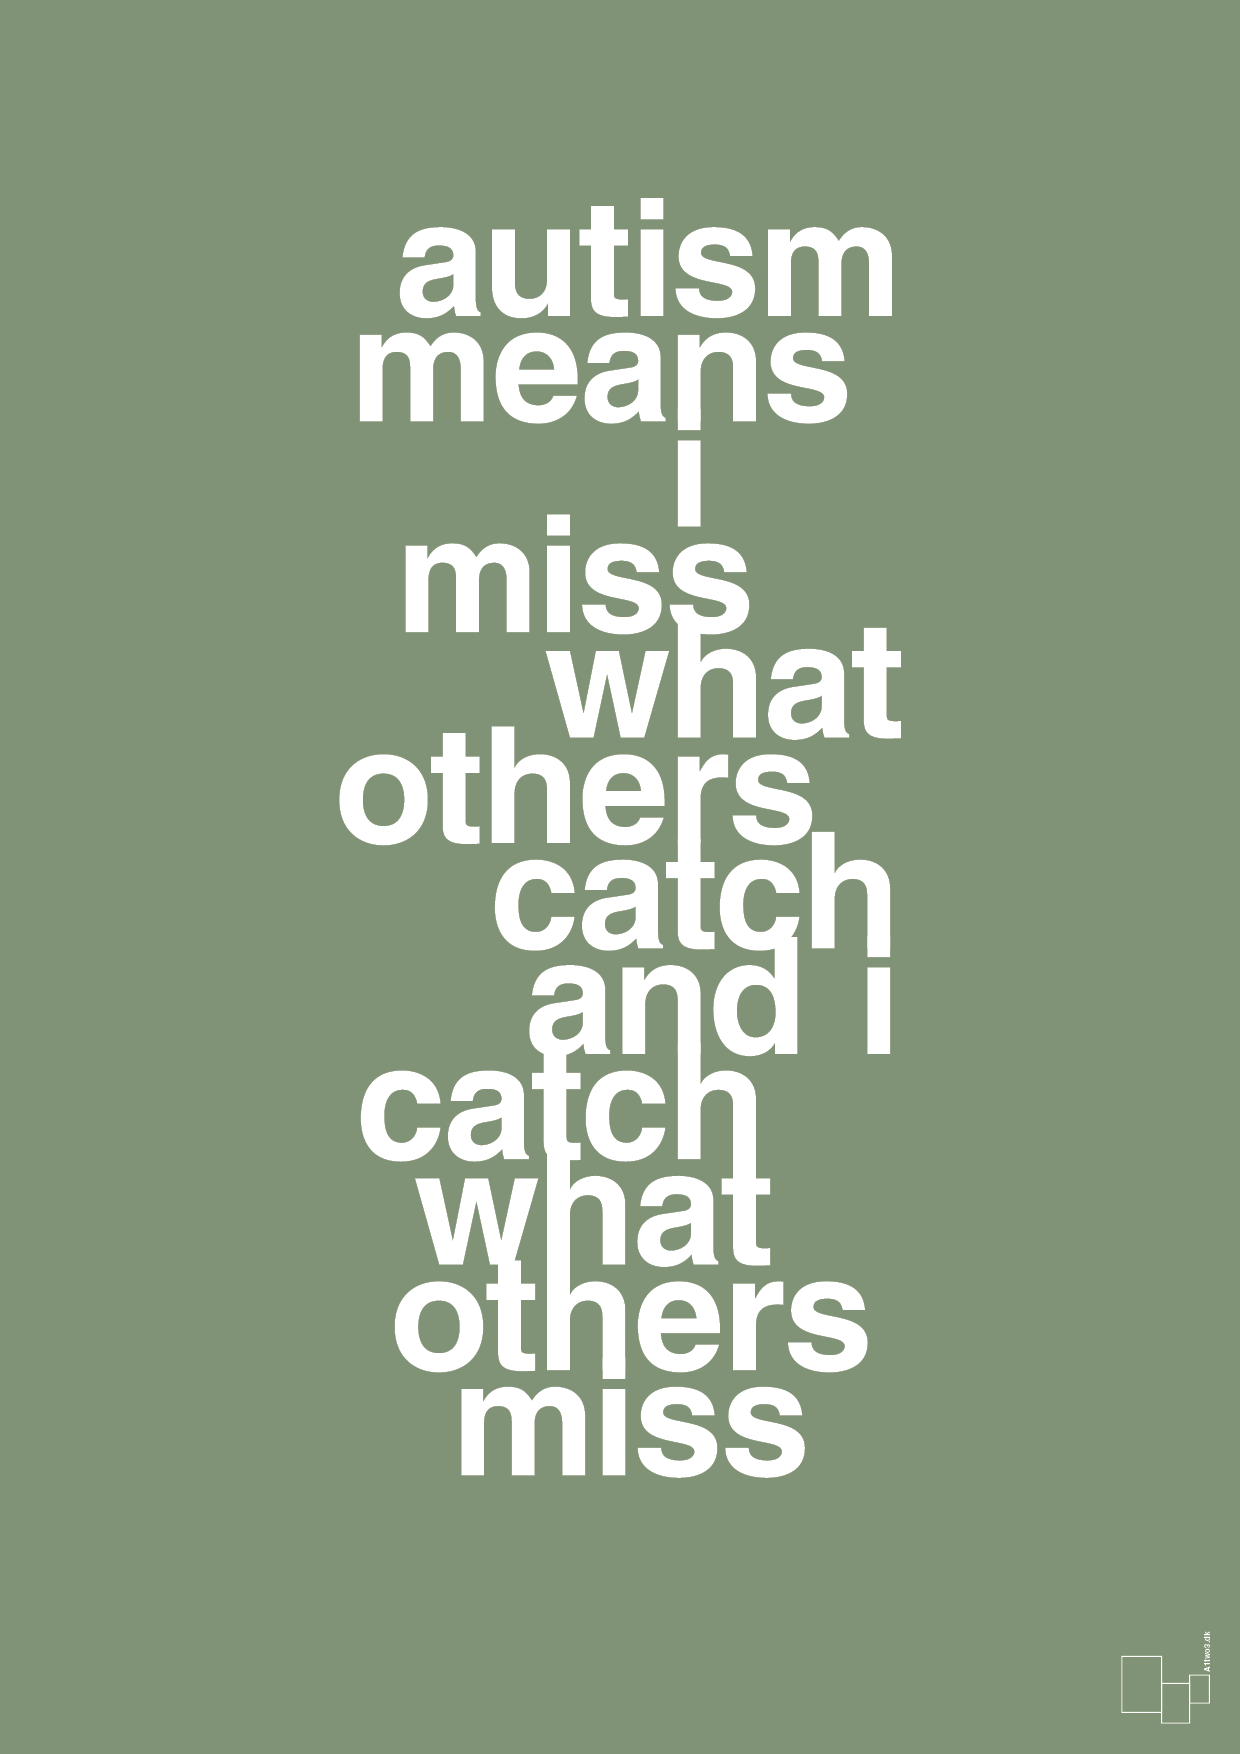 autism means i miss what others catch and i catch what others miss - Plakat med Samfund i Jade